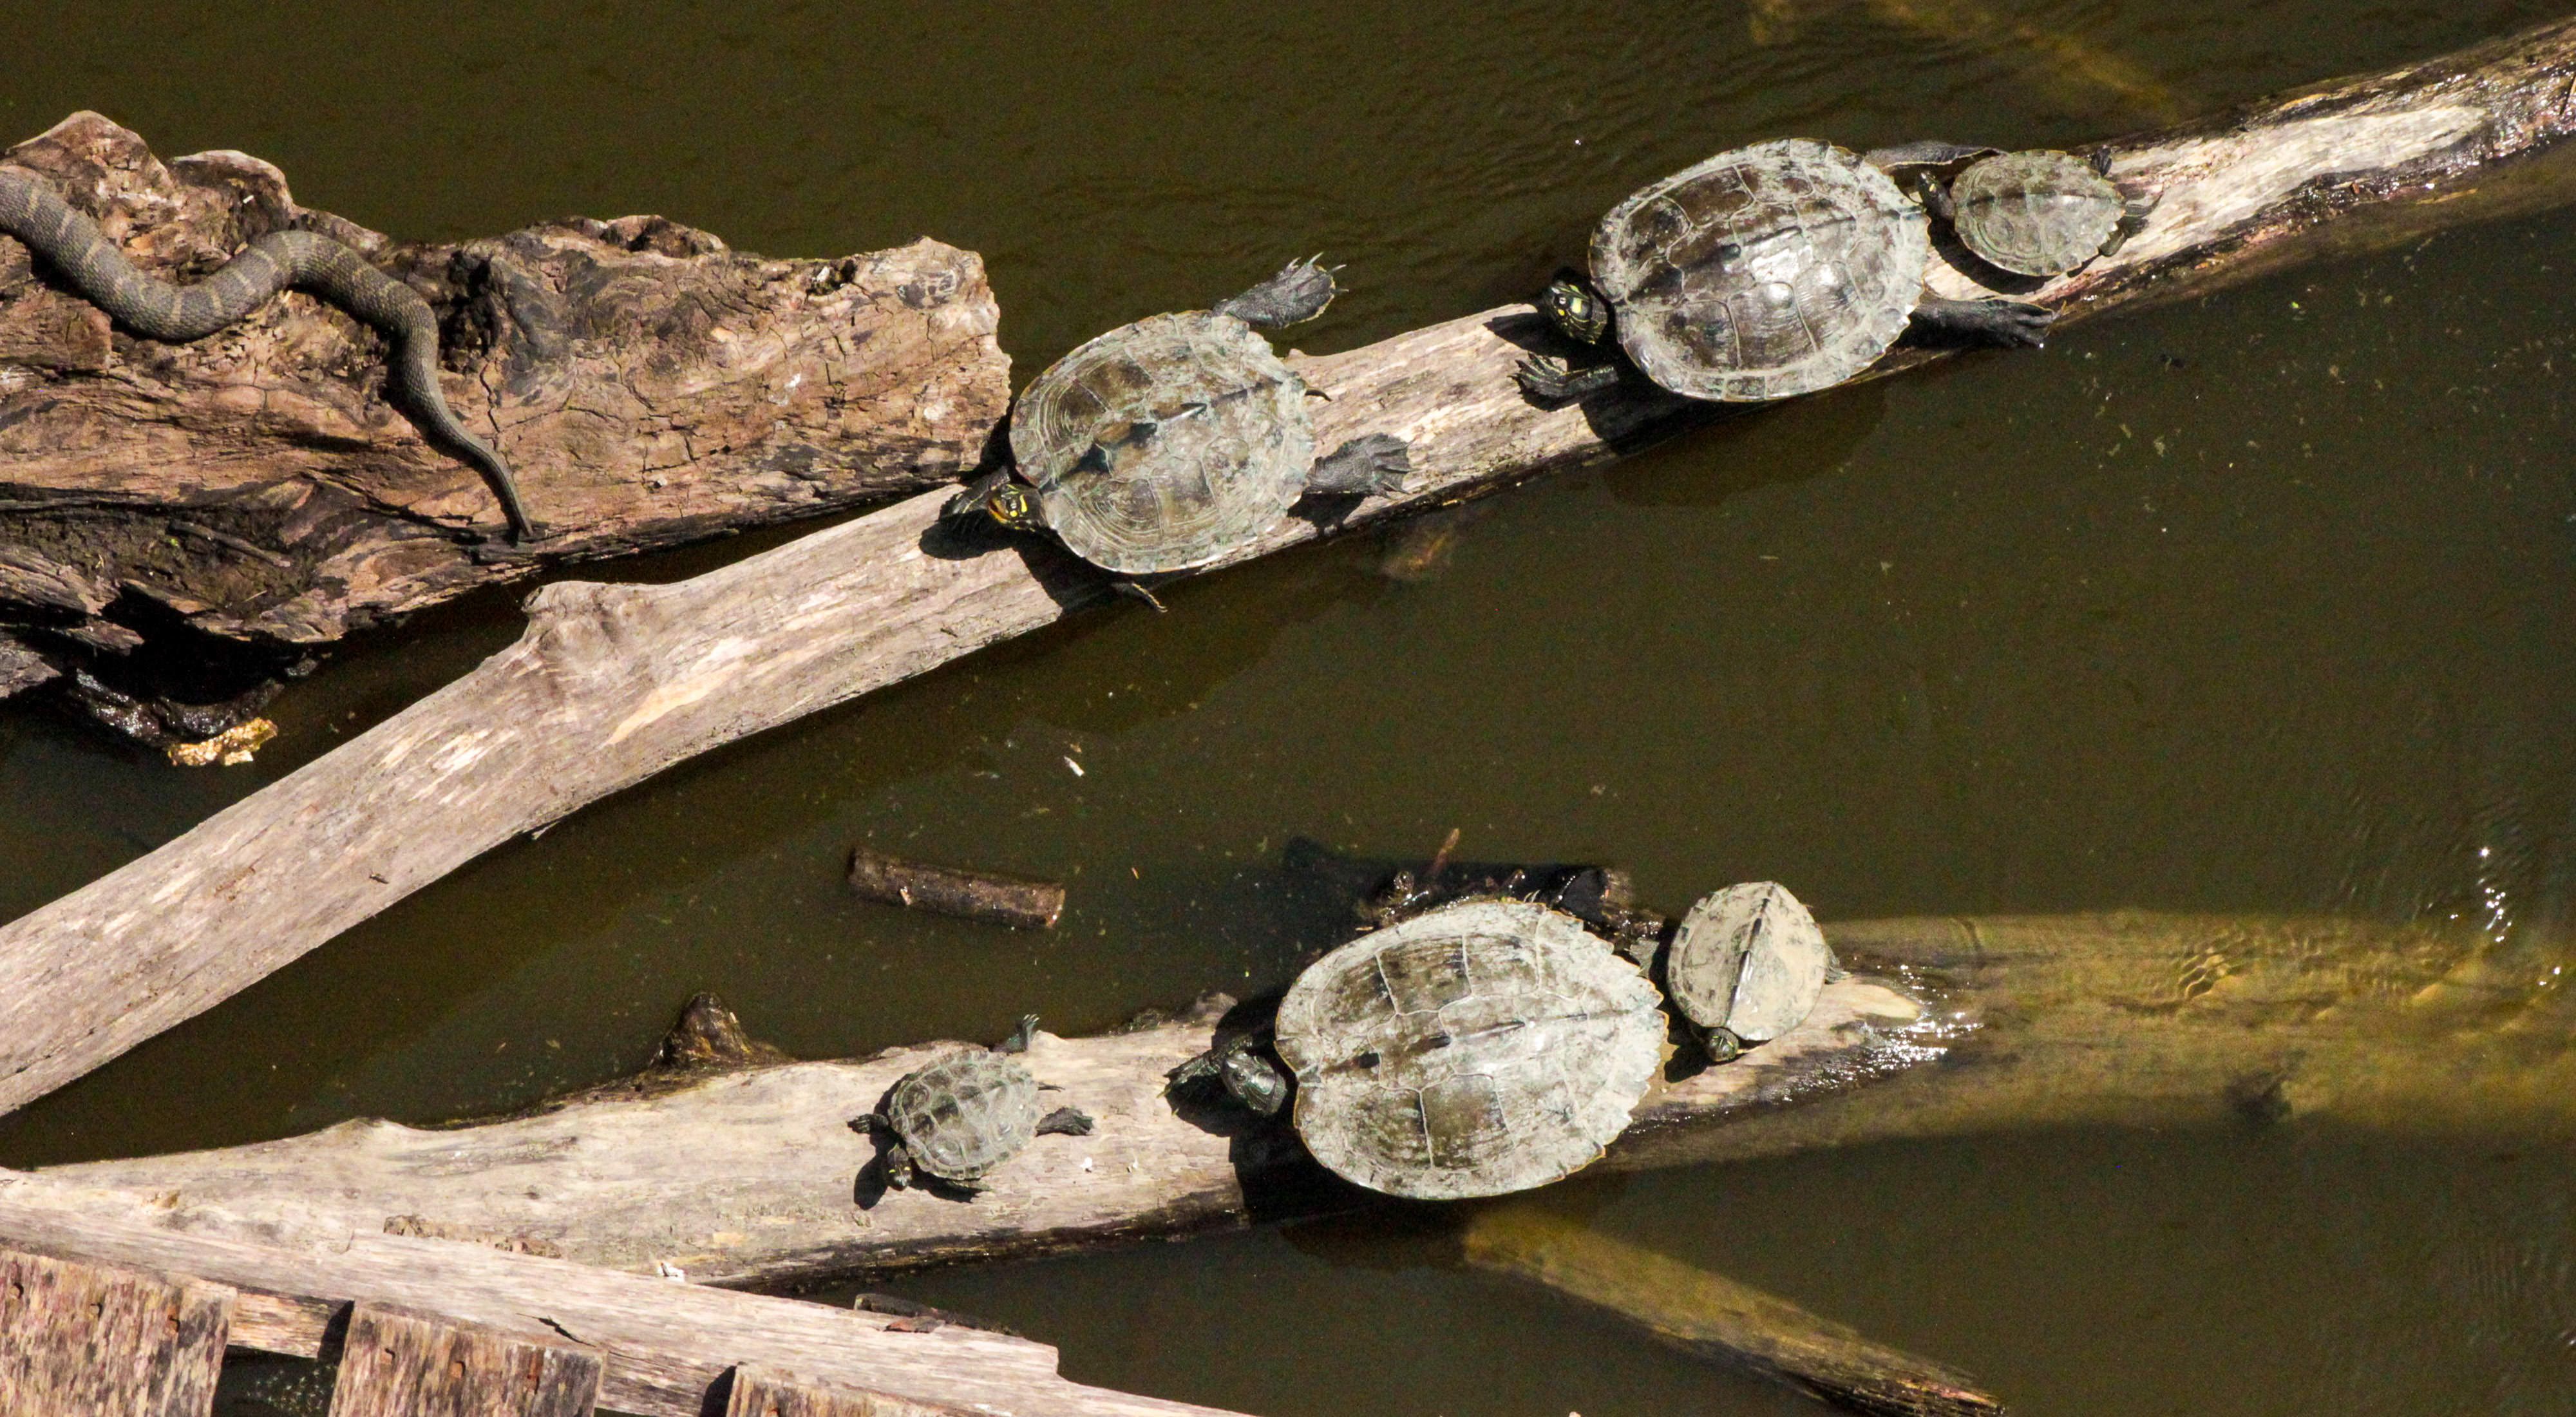 Turtles in The Land of the Swamp White Oak basking in the sun on a log